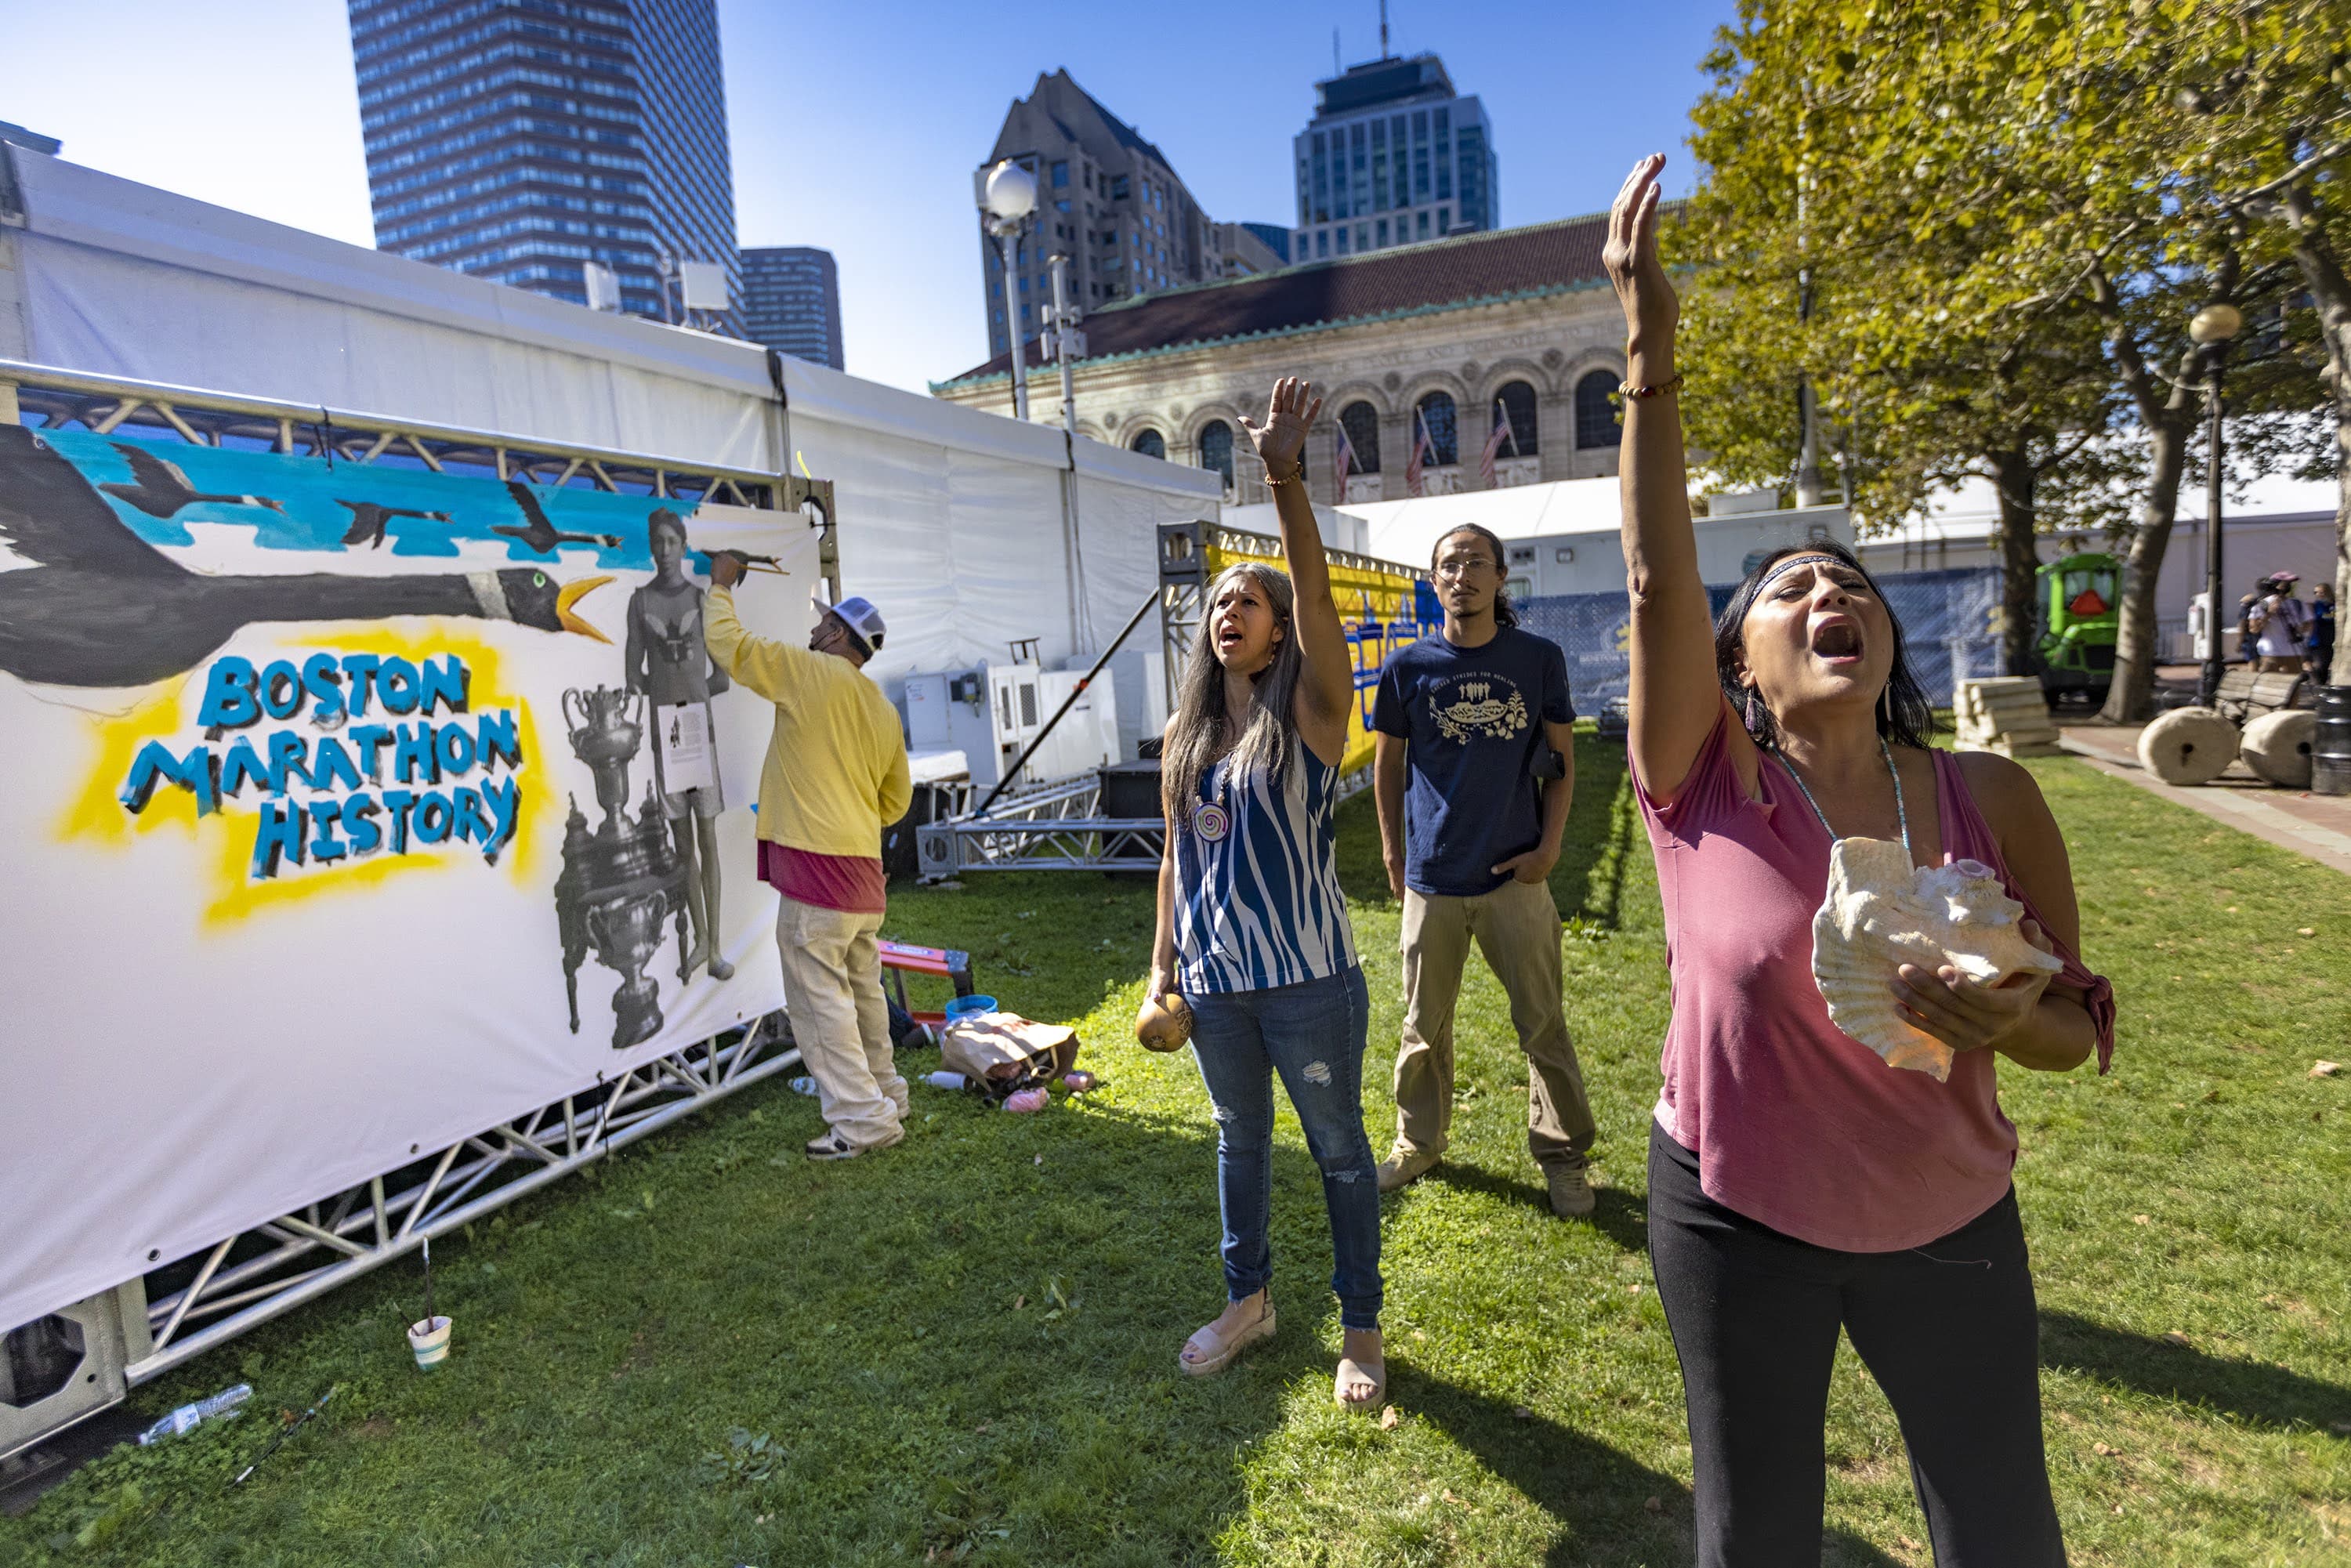 Chali’Naru Dones, right, and Darlene Flores, co-founders of the Indigenous Peoples' Day Committee in Newton, perform a healing song as artist Robert Peters paints a mural illustrating Indigenous history in the Boston Marathon near the finish line in Copley Square. (Jesse Costa/WBUR)